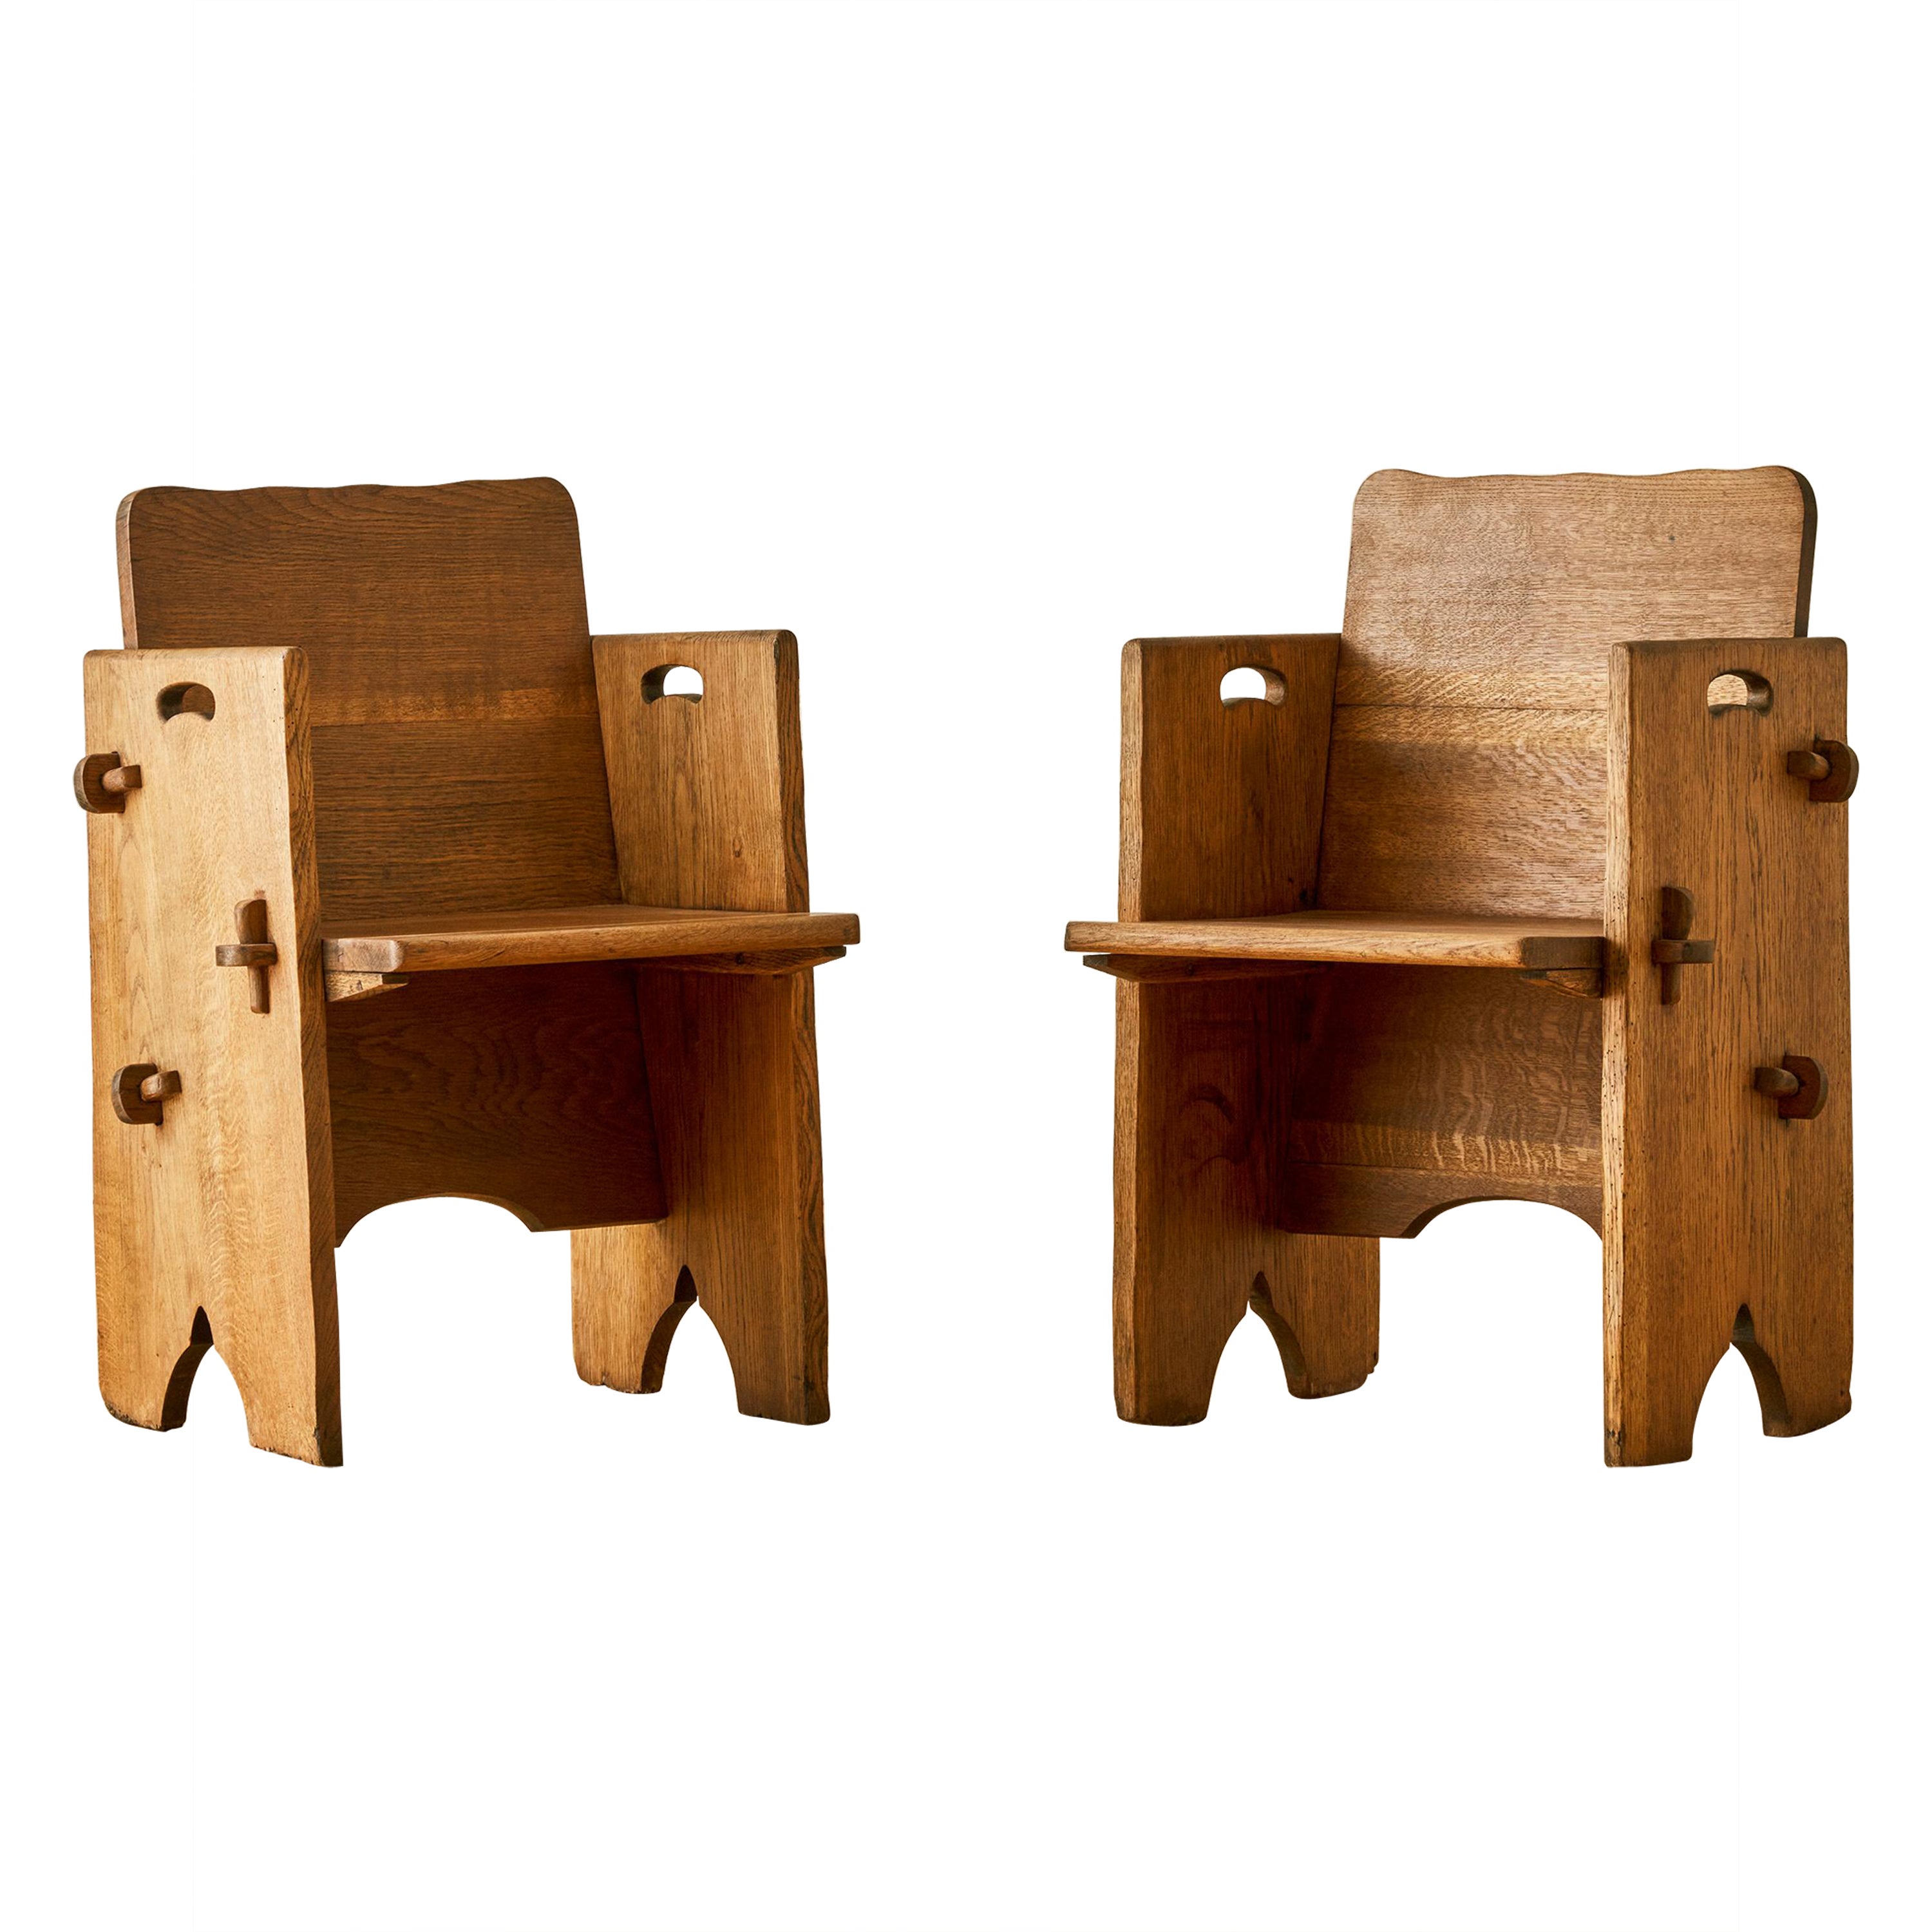 A Pair of British Scalloped Edge Oak Pegged Chairs.  For Sale